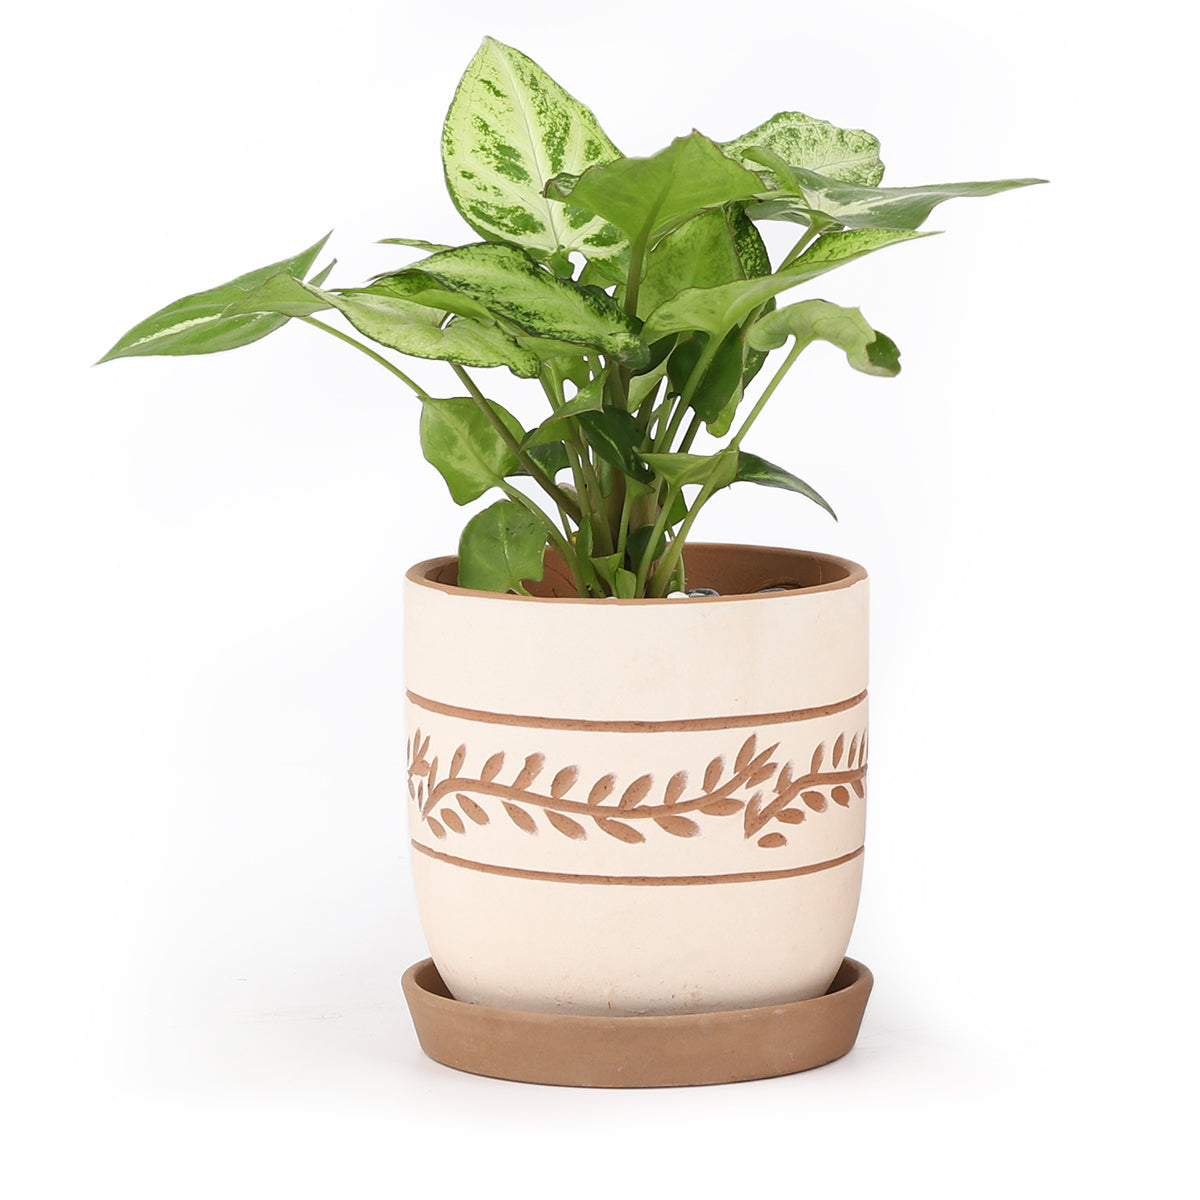 White Clay Horizontal Leaf Pattern Pot for sale, Large terracotta pot for planting succulents and houseplants